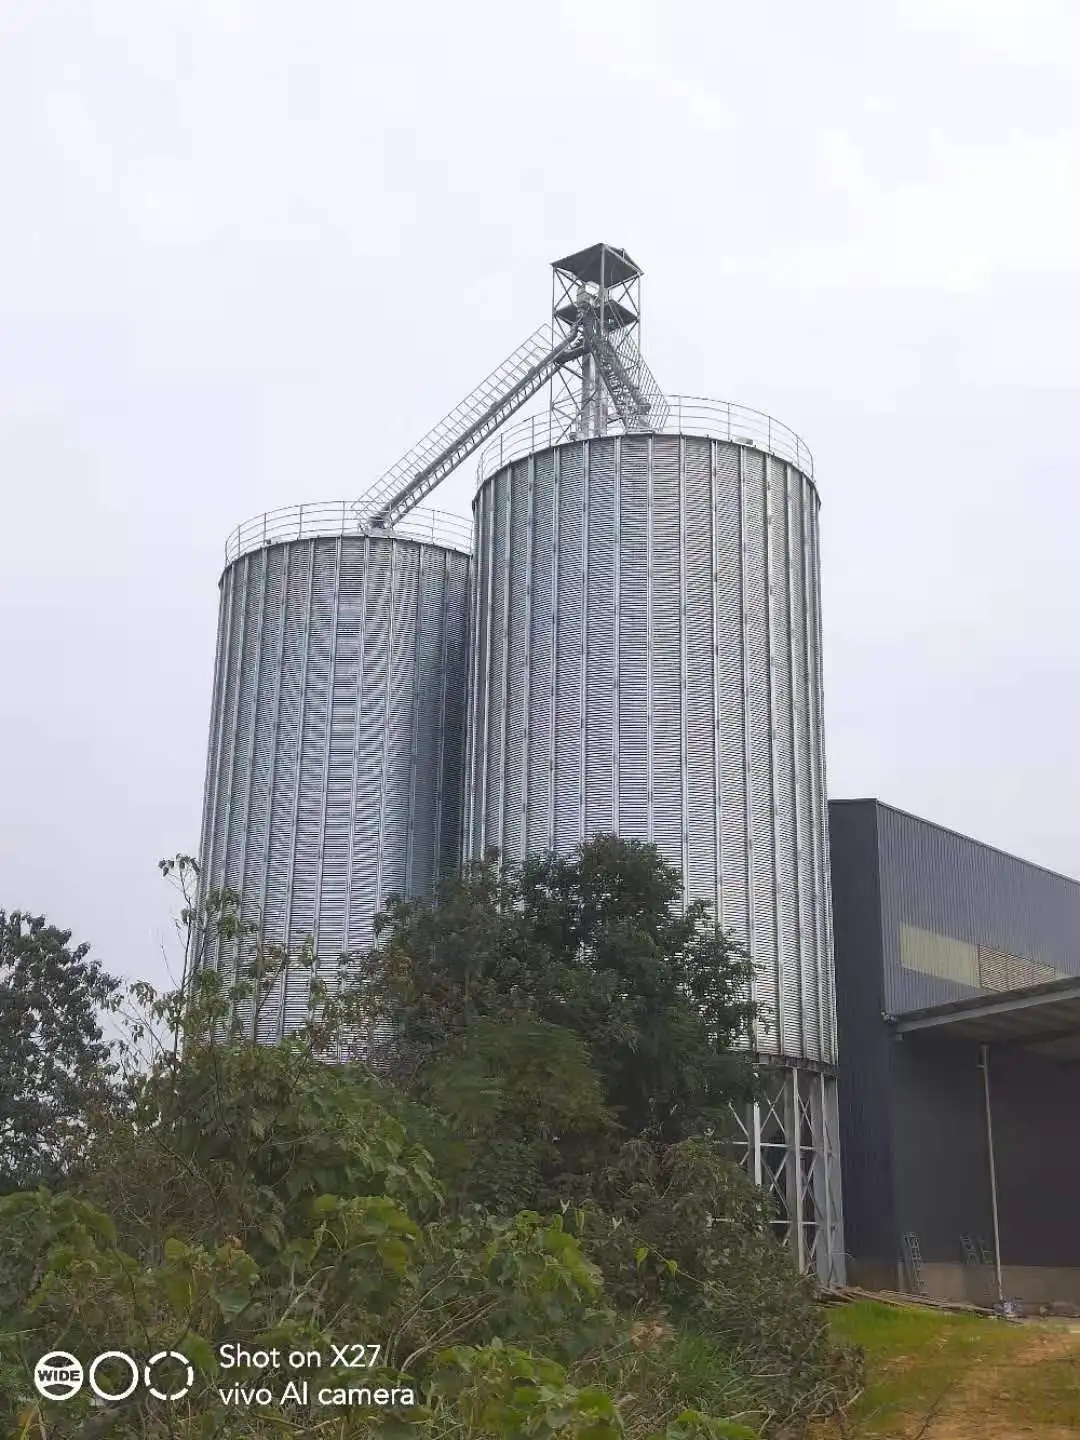 More available space agriculture machinery equipment silo tank Capacity 3T to 300T Steel Silos Cost